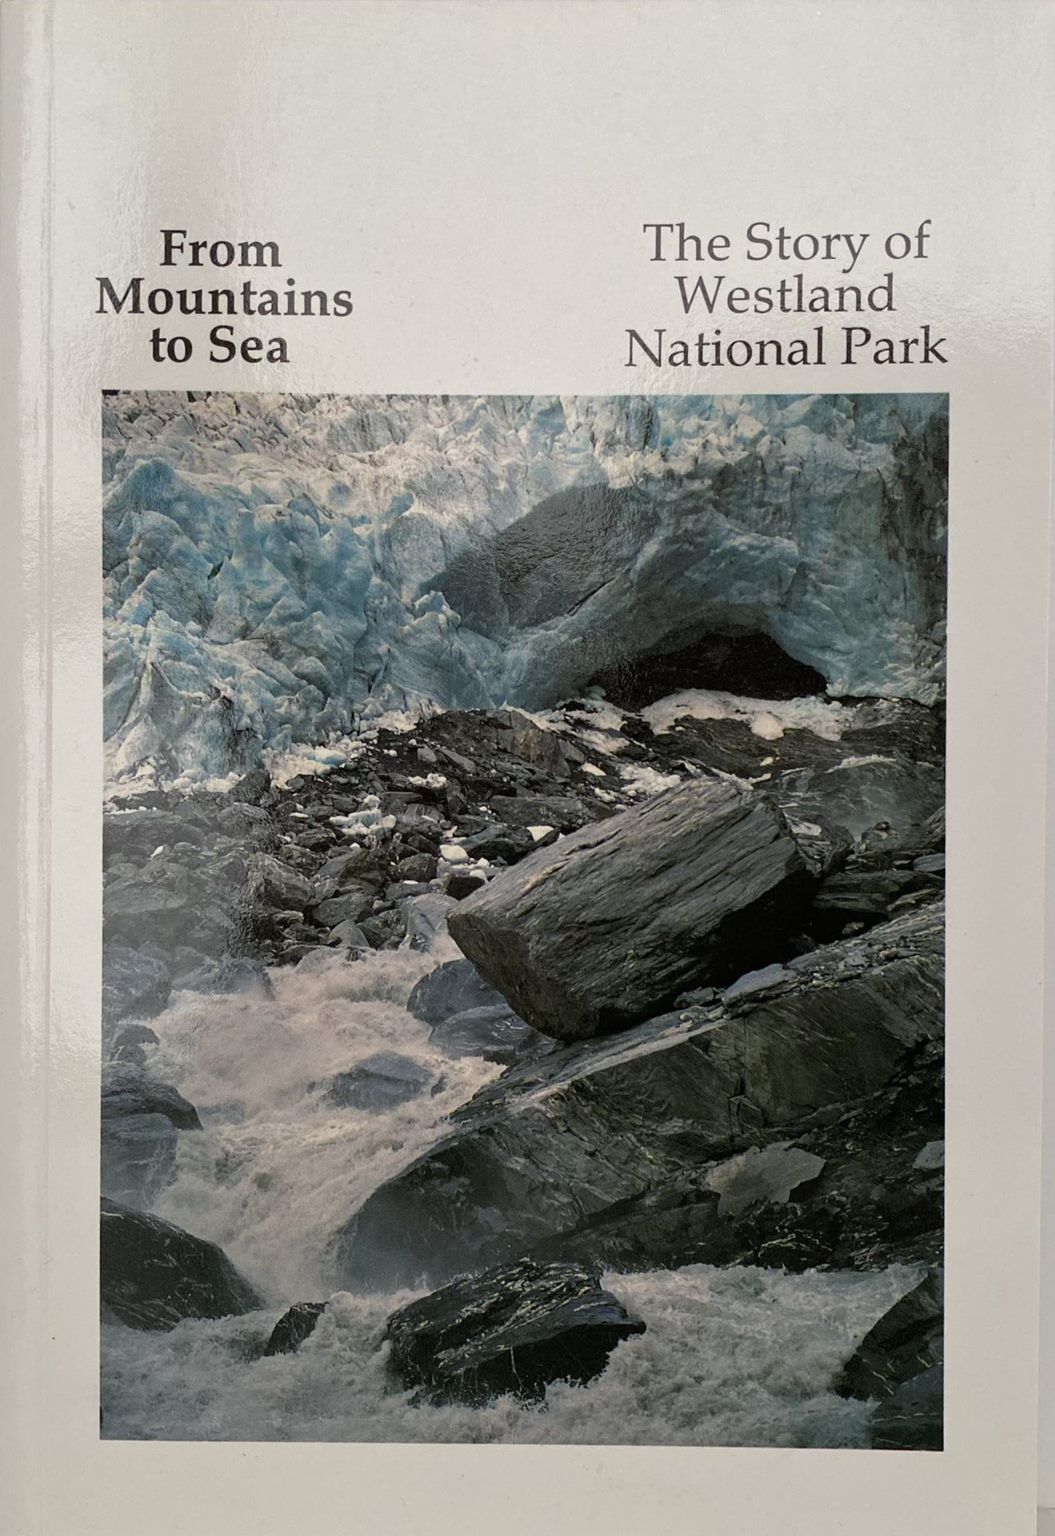 FROM MOUNTAINS TO SEA: The Story of Westland National Park